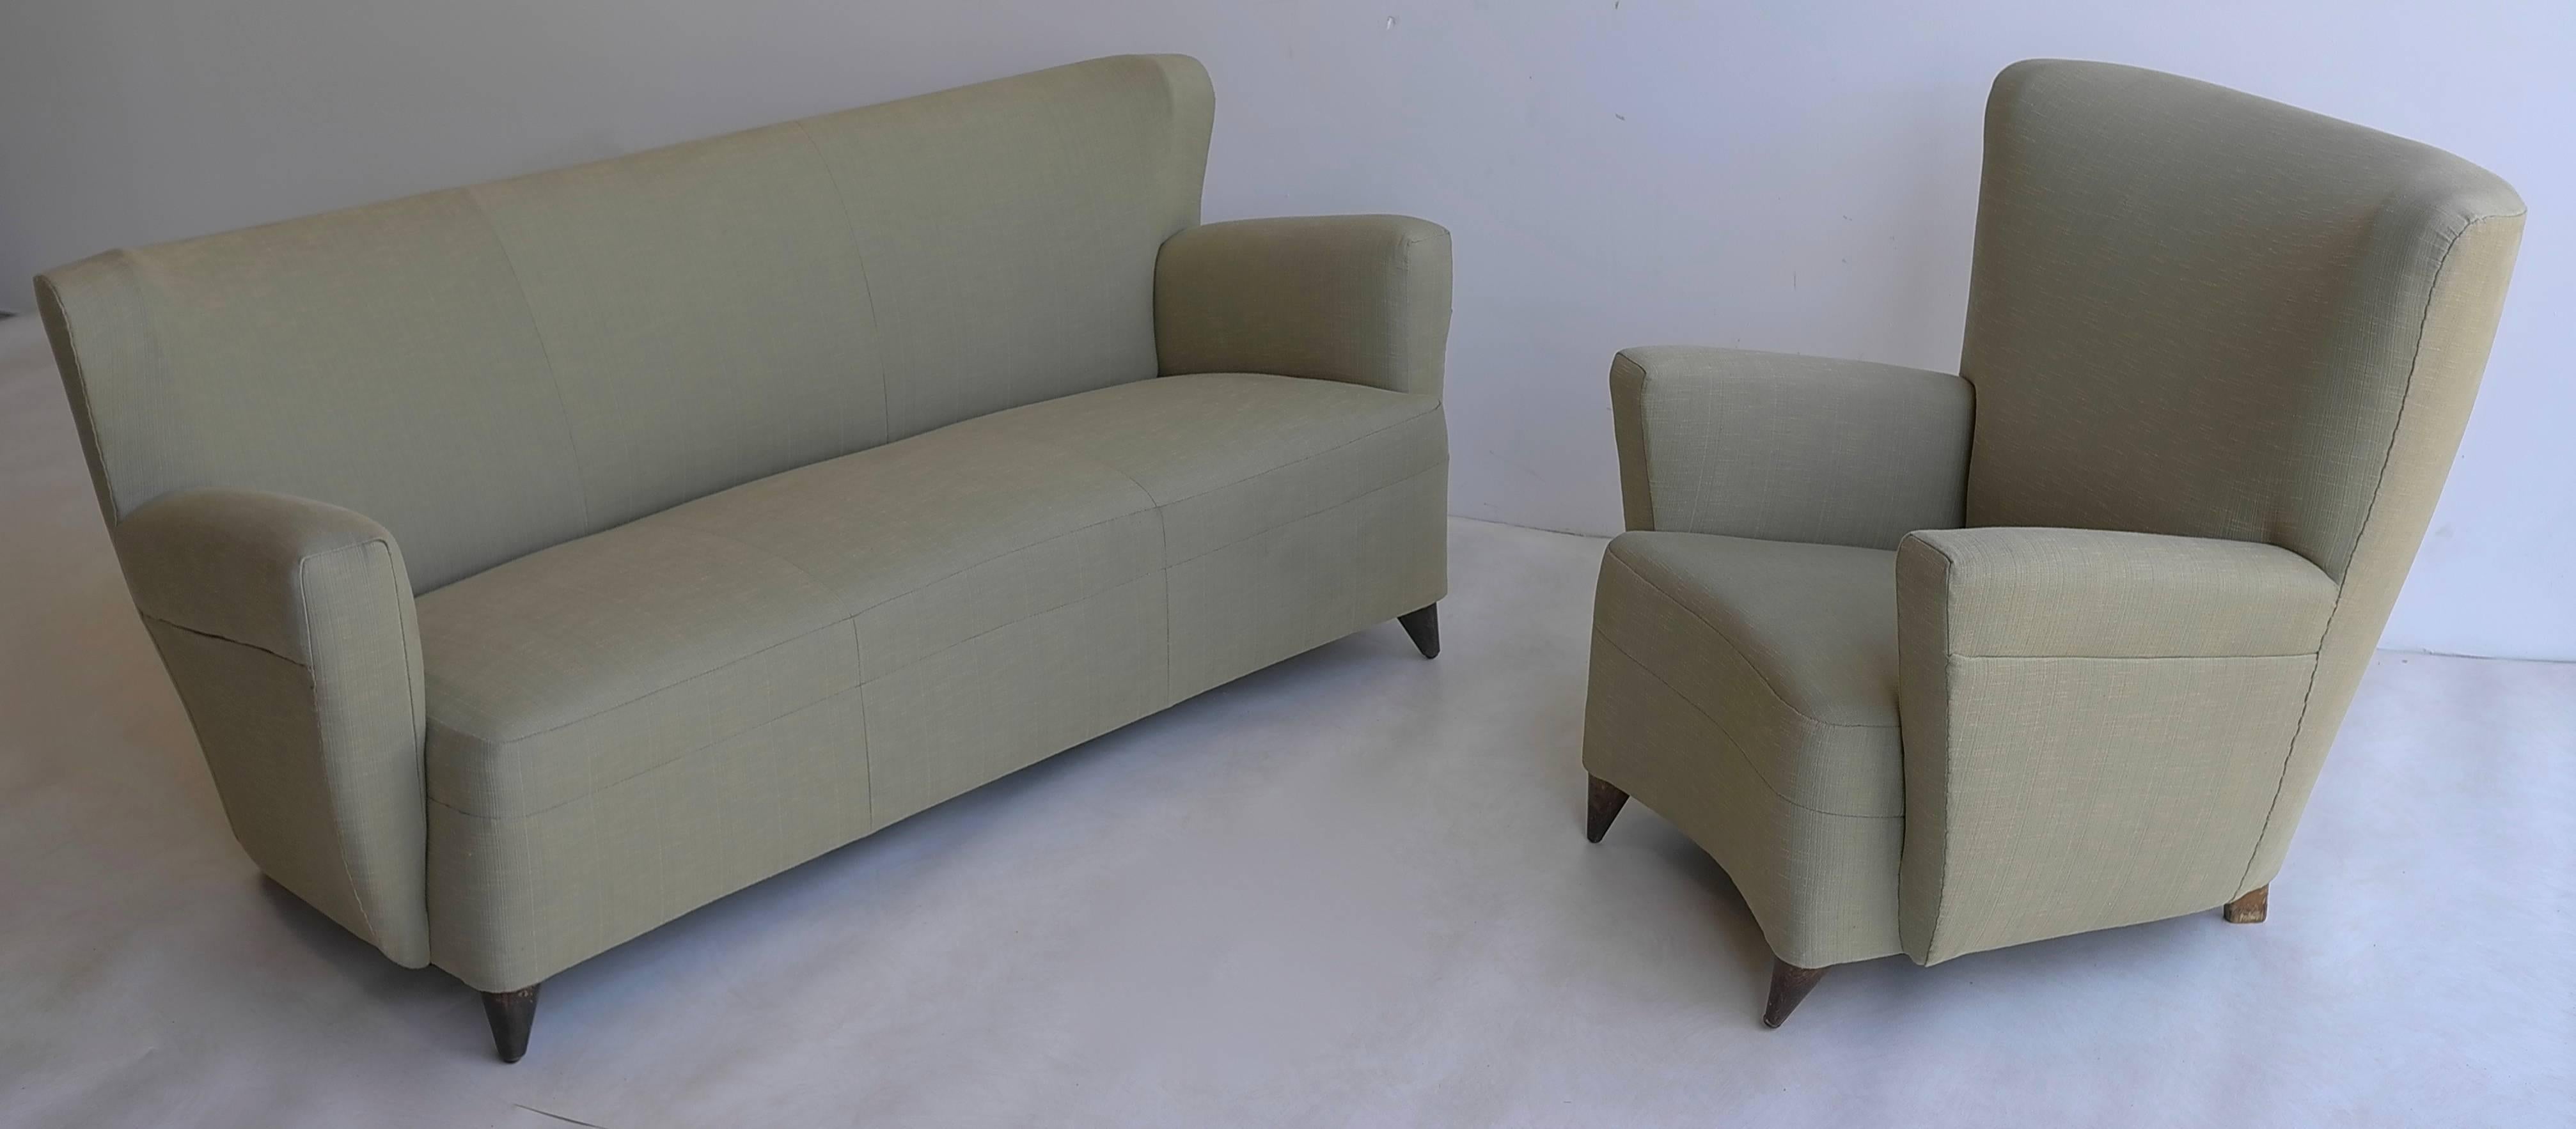 Green Italian sofa and armchair in style of Gio Ponti. Newly upholstered in fine green fabric.